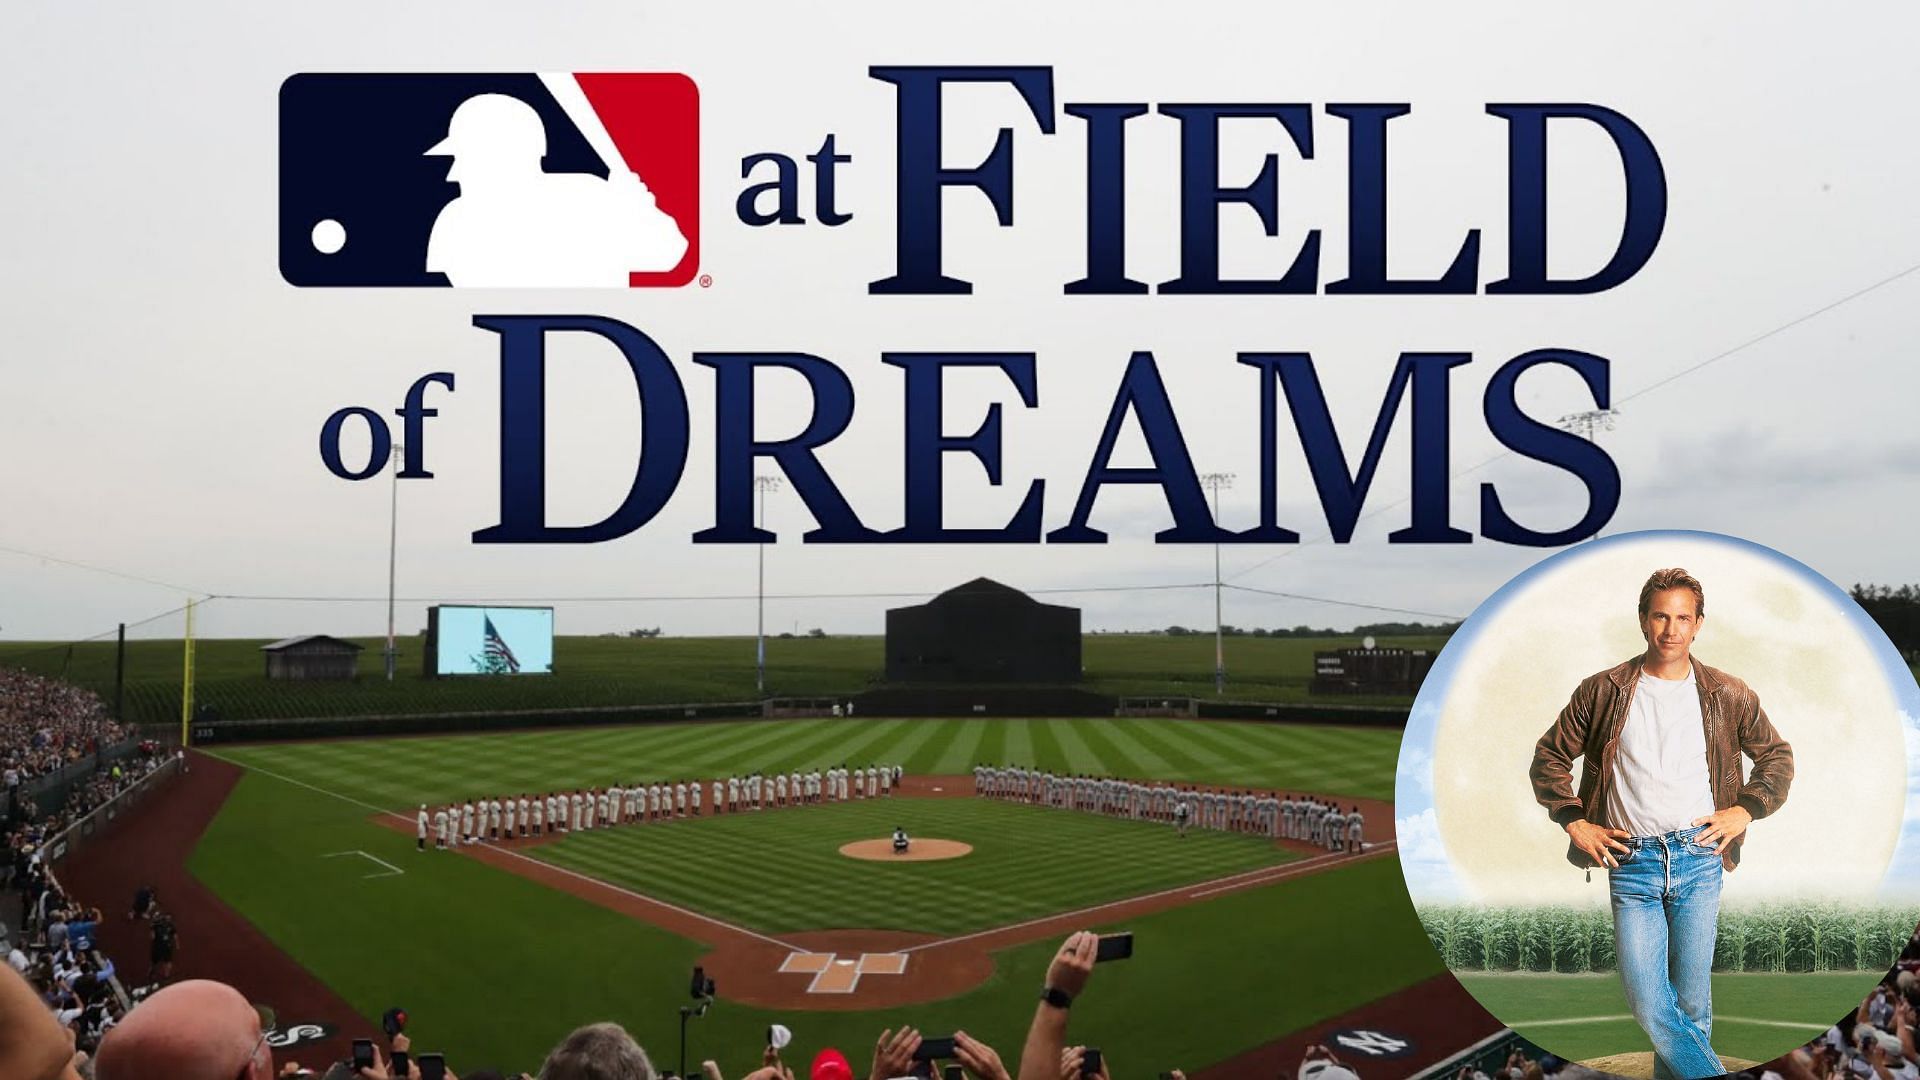 MLB Field of Dreams Game; the movie poster of &quot;Field of Dreams&quot; (inset)